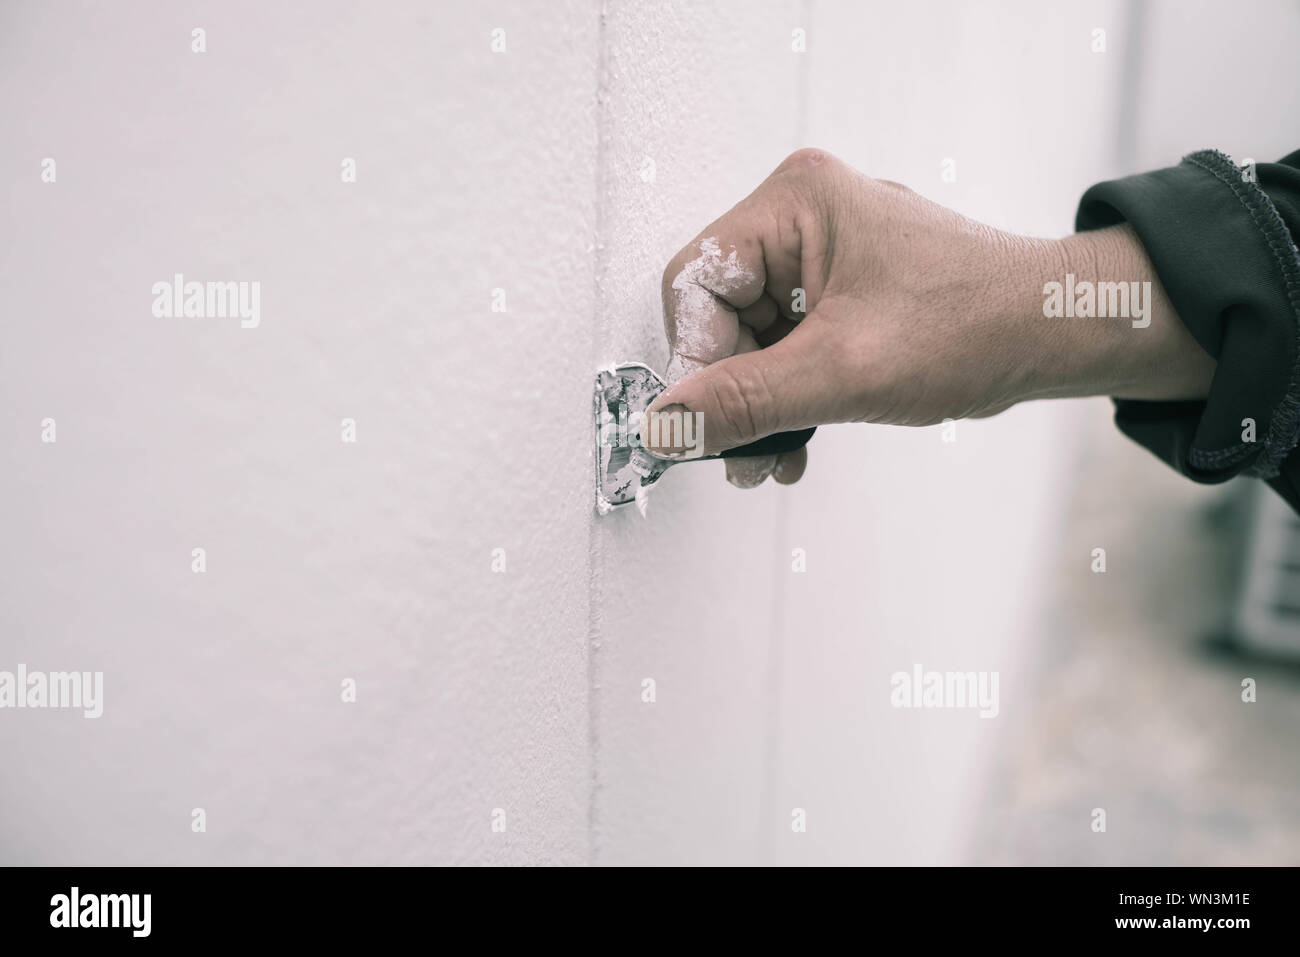 Cropped Image Of House Painter Removing Paint From Wall Stock Photo